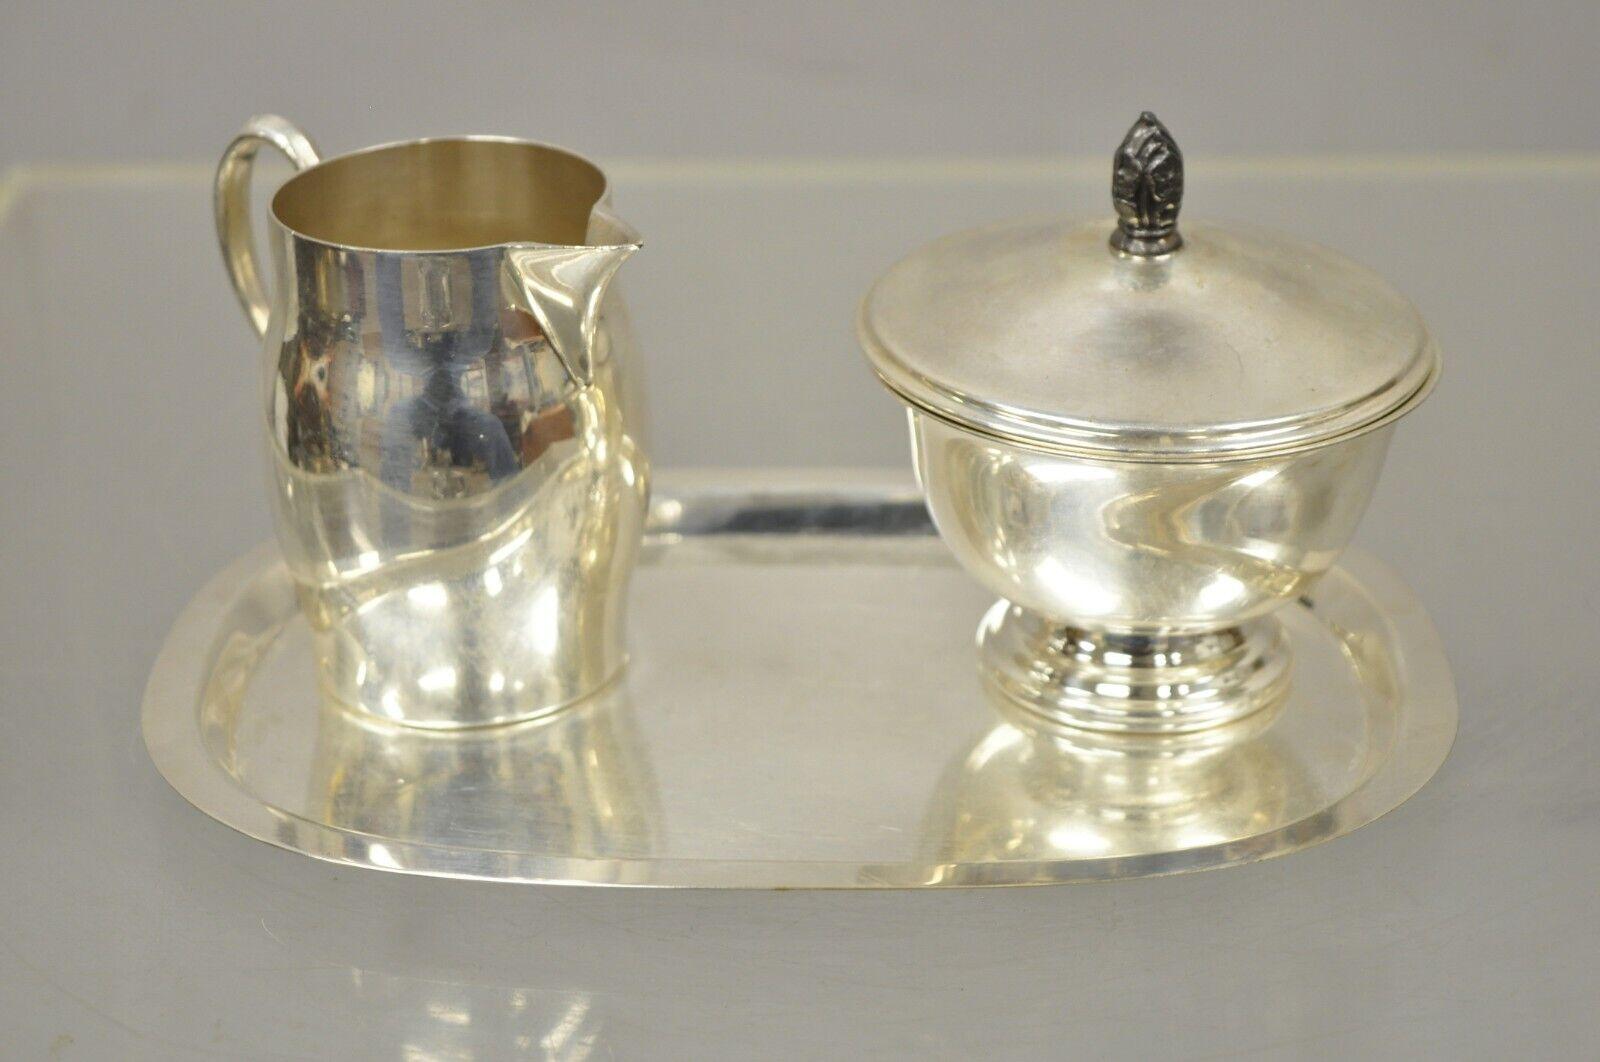 F.B Rogers Paul revere silver plate serving set, sugar bowl creamer tray - 3 piece set. Item features 